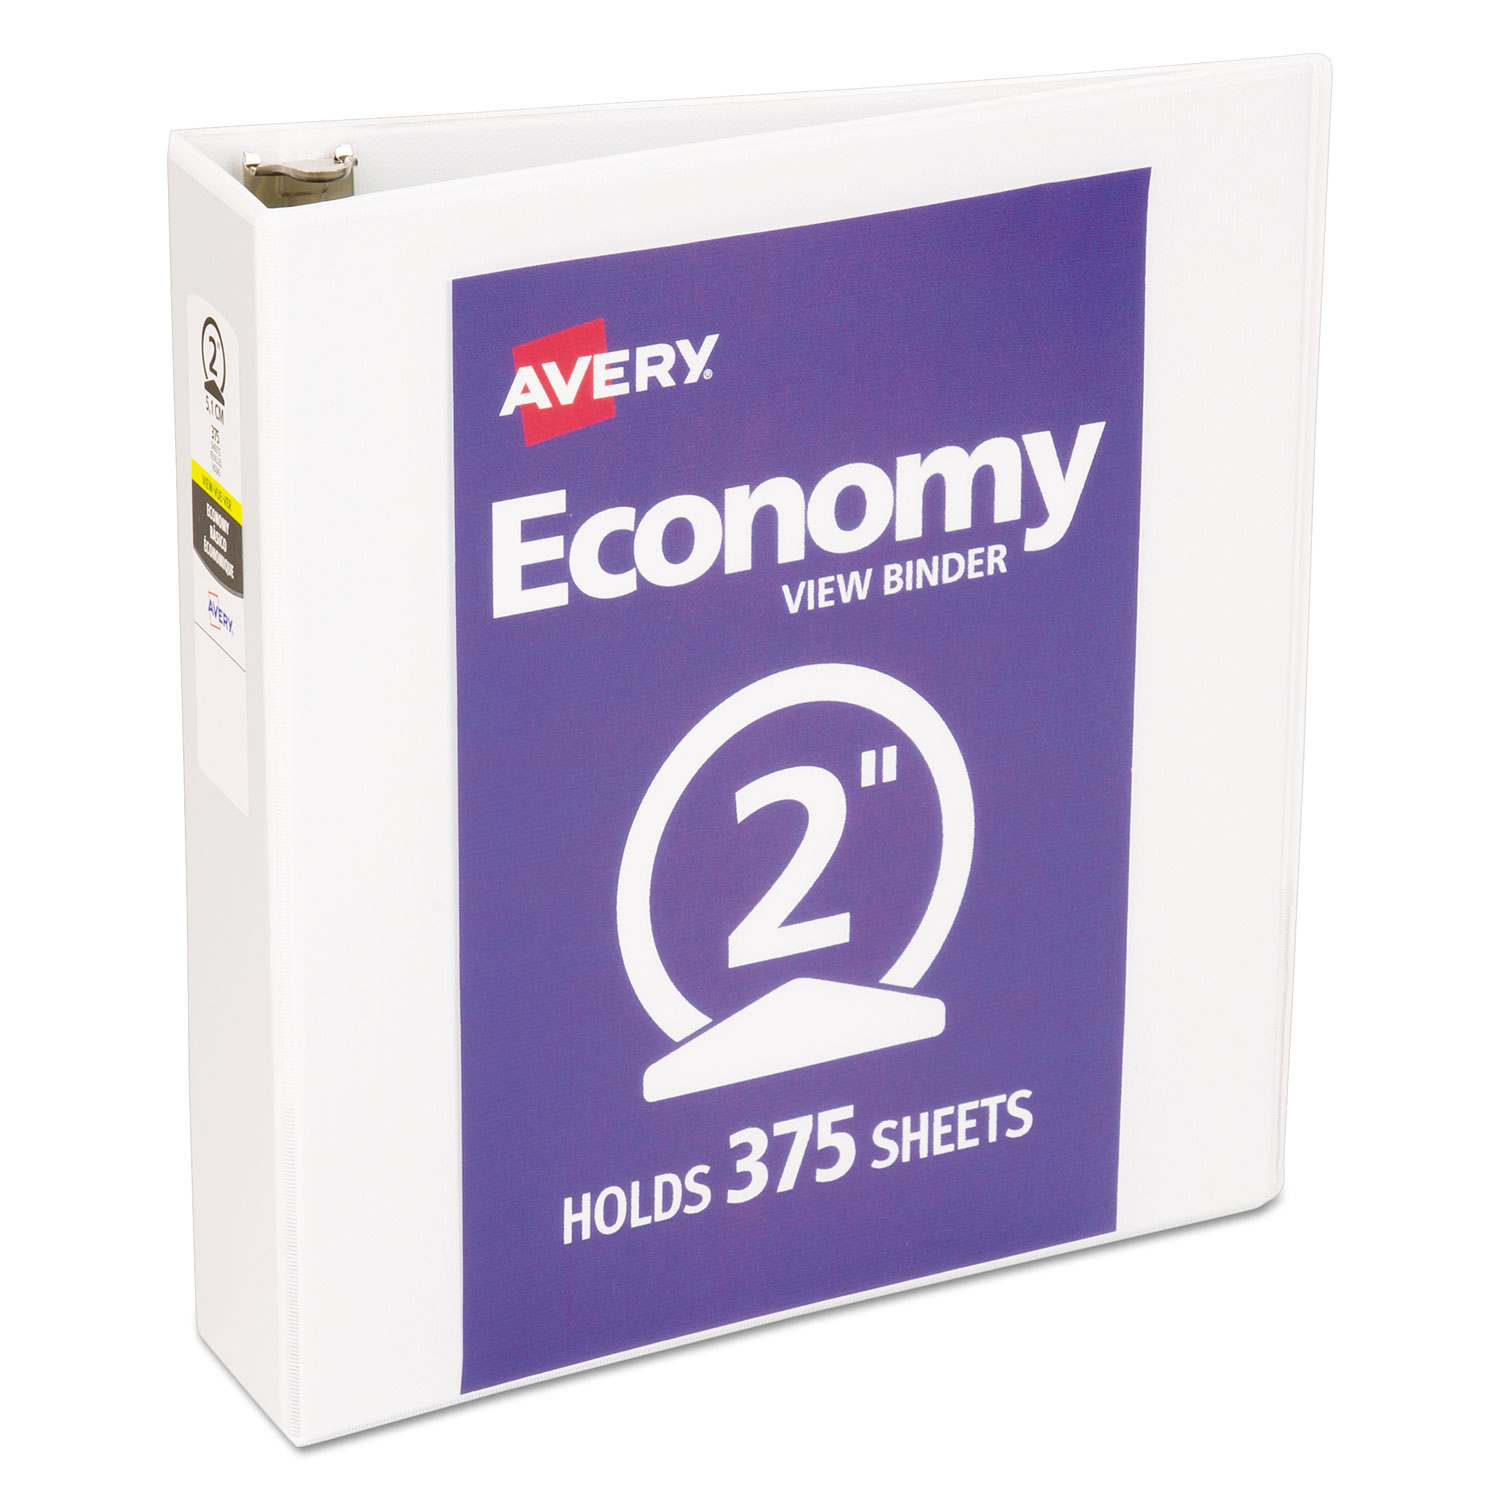  Avery 05731 Economy View Binder with Round Rings , 3 Rings, 2 Capacity, 11 x 8.5, White (AVE05731) 